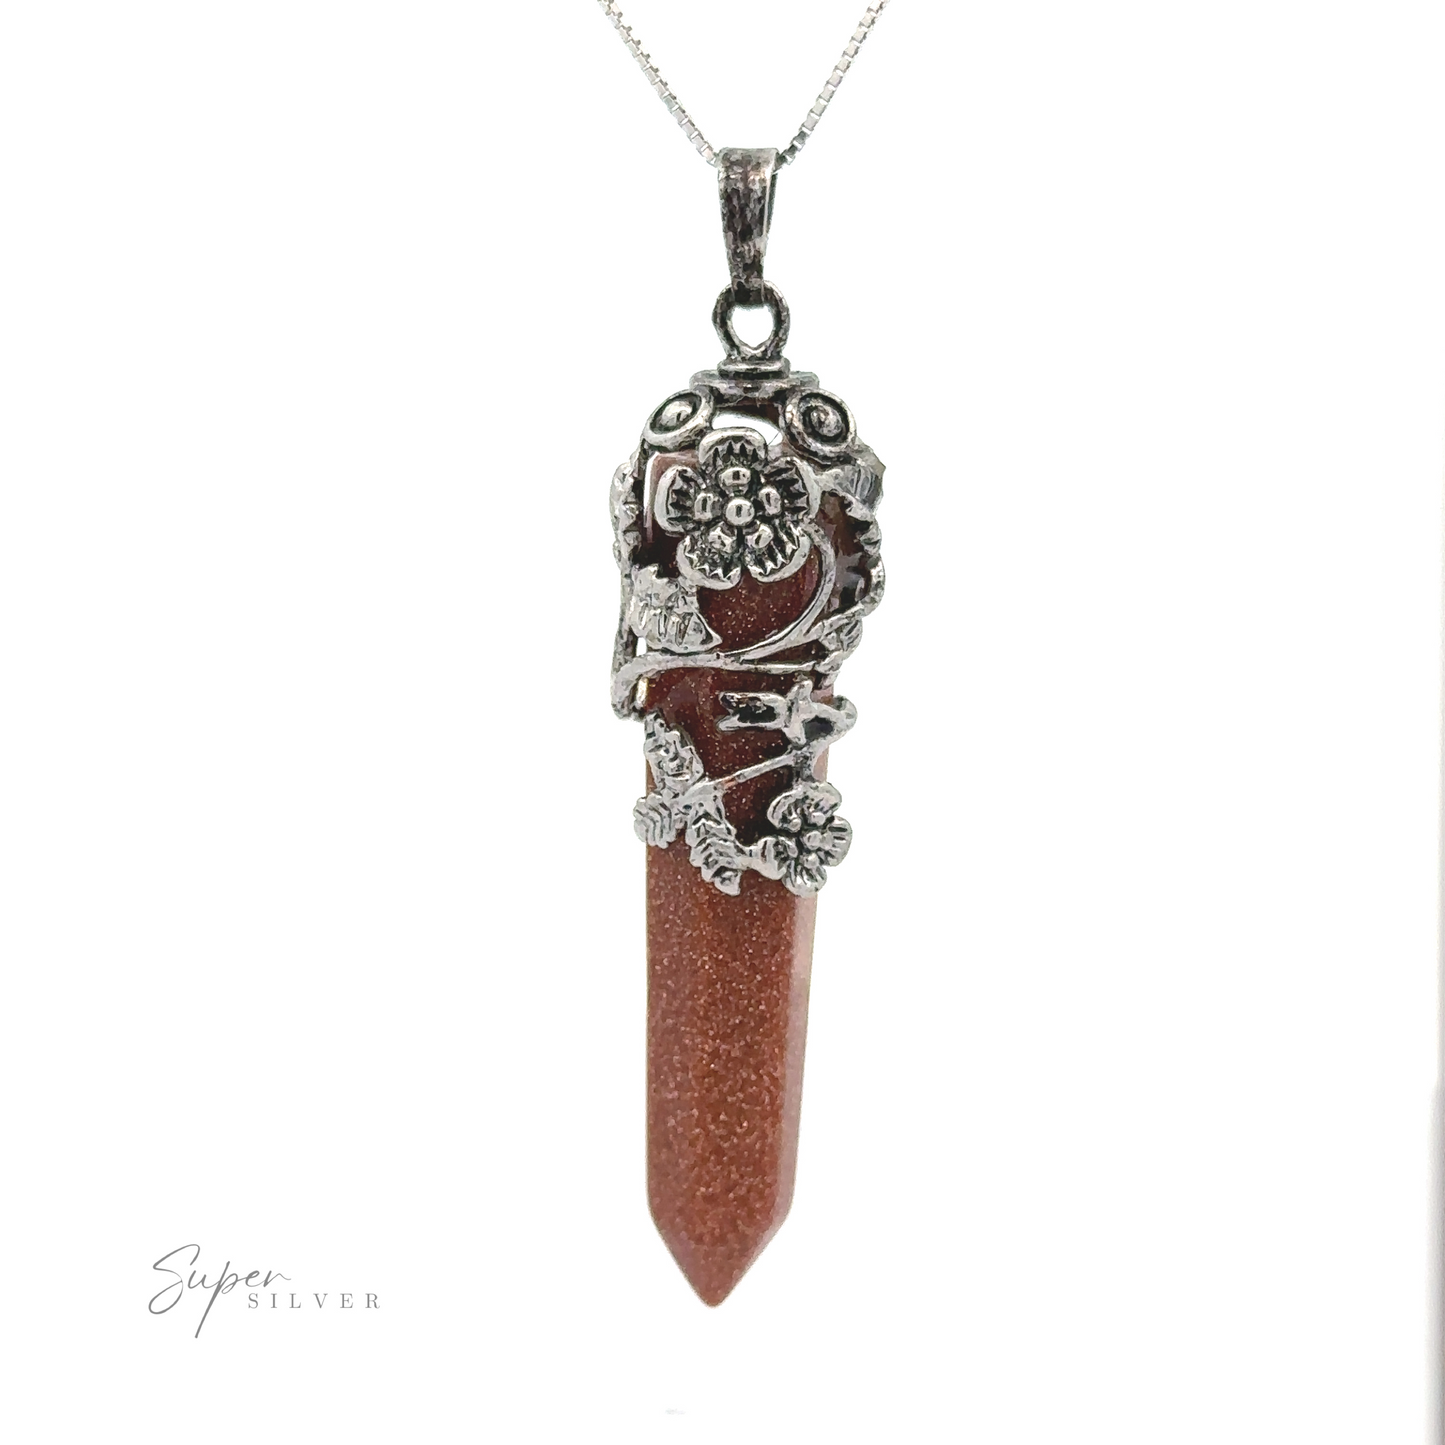 
                  
                    Close-up of a Silver-Plated Flower Design Stone Pendant featuring an obelisk-shaped brown stone encased in intricate silver floral and leaf patterns, suspended on a silver chain against a white background.
                  
                